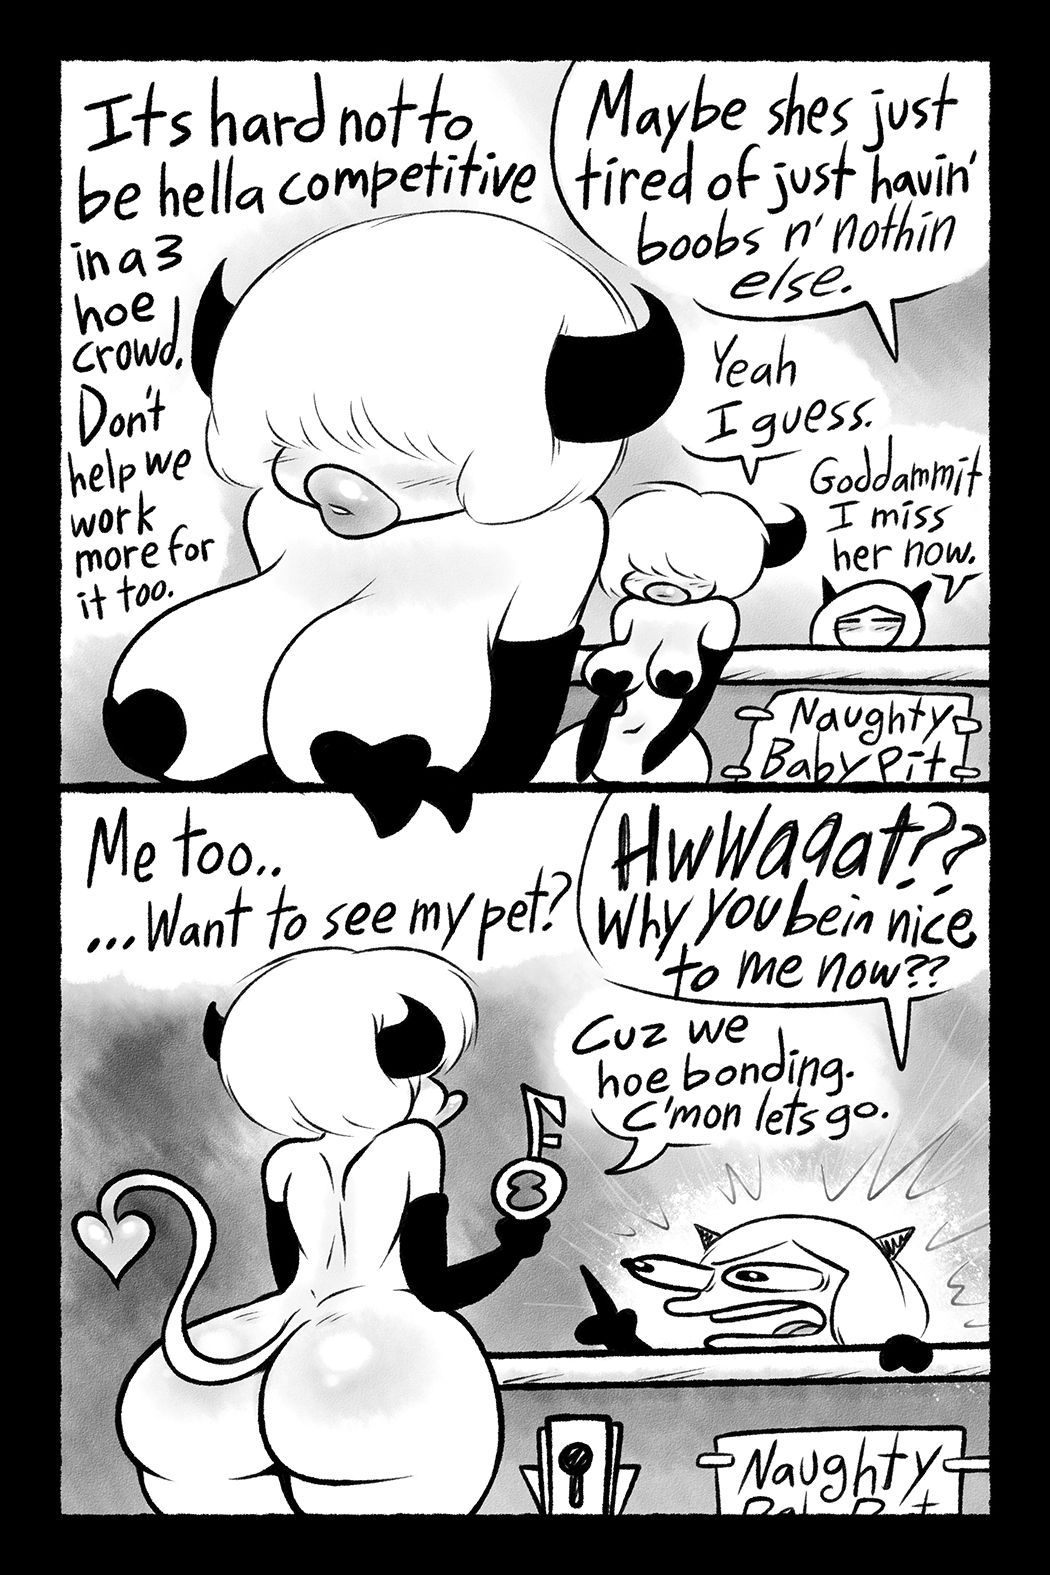 [CheezyWEAPON] Horny Hell Hoes Origins 97